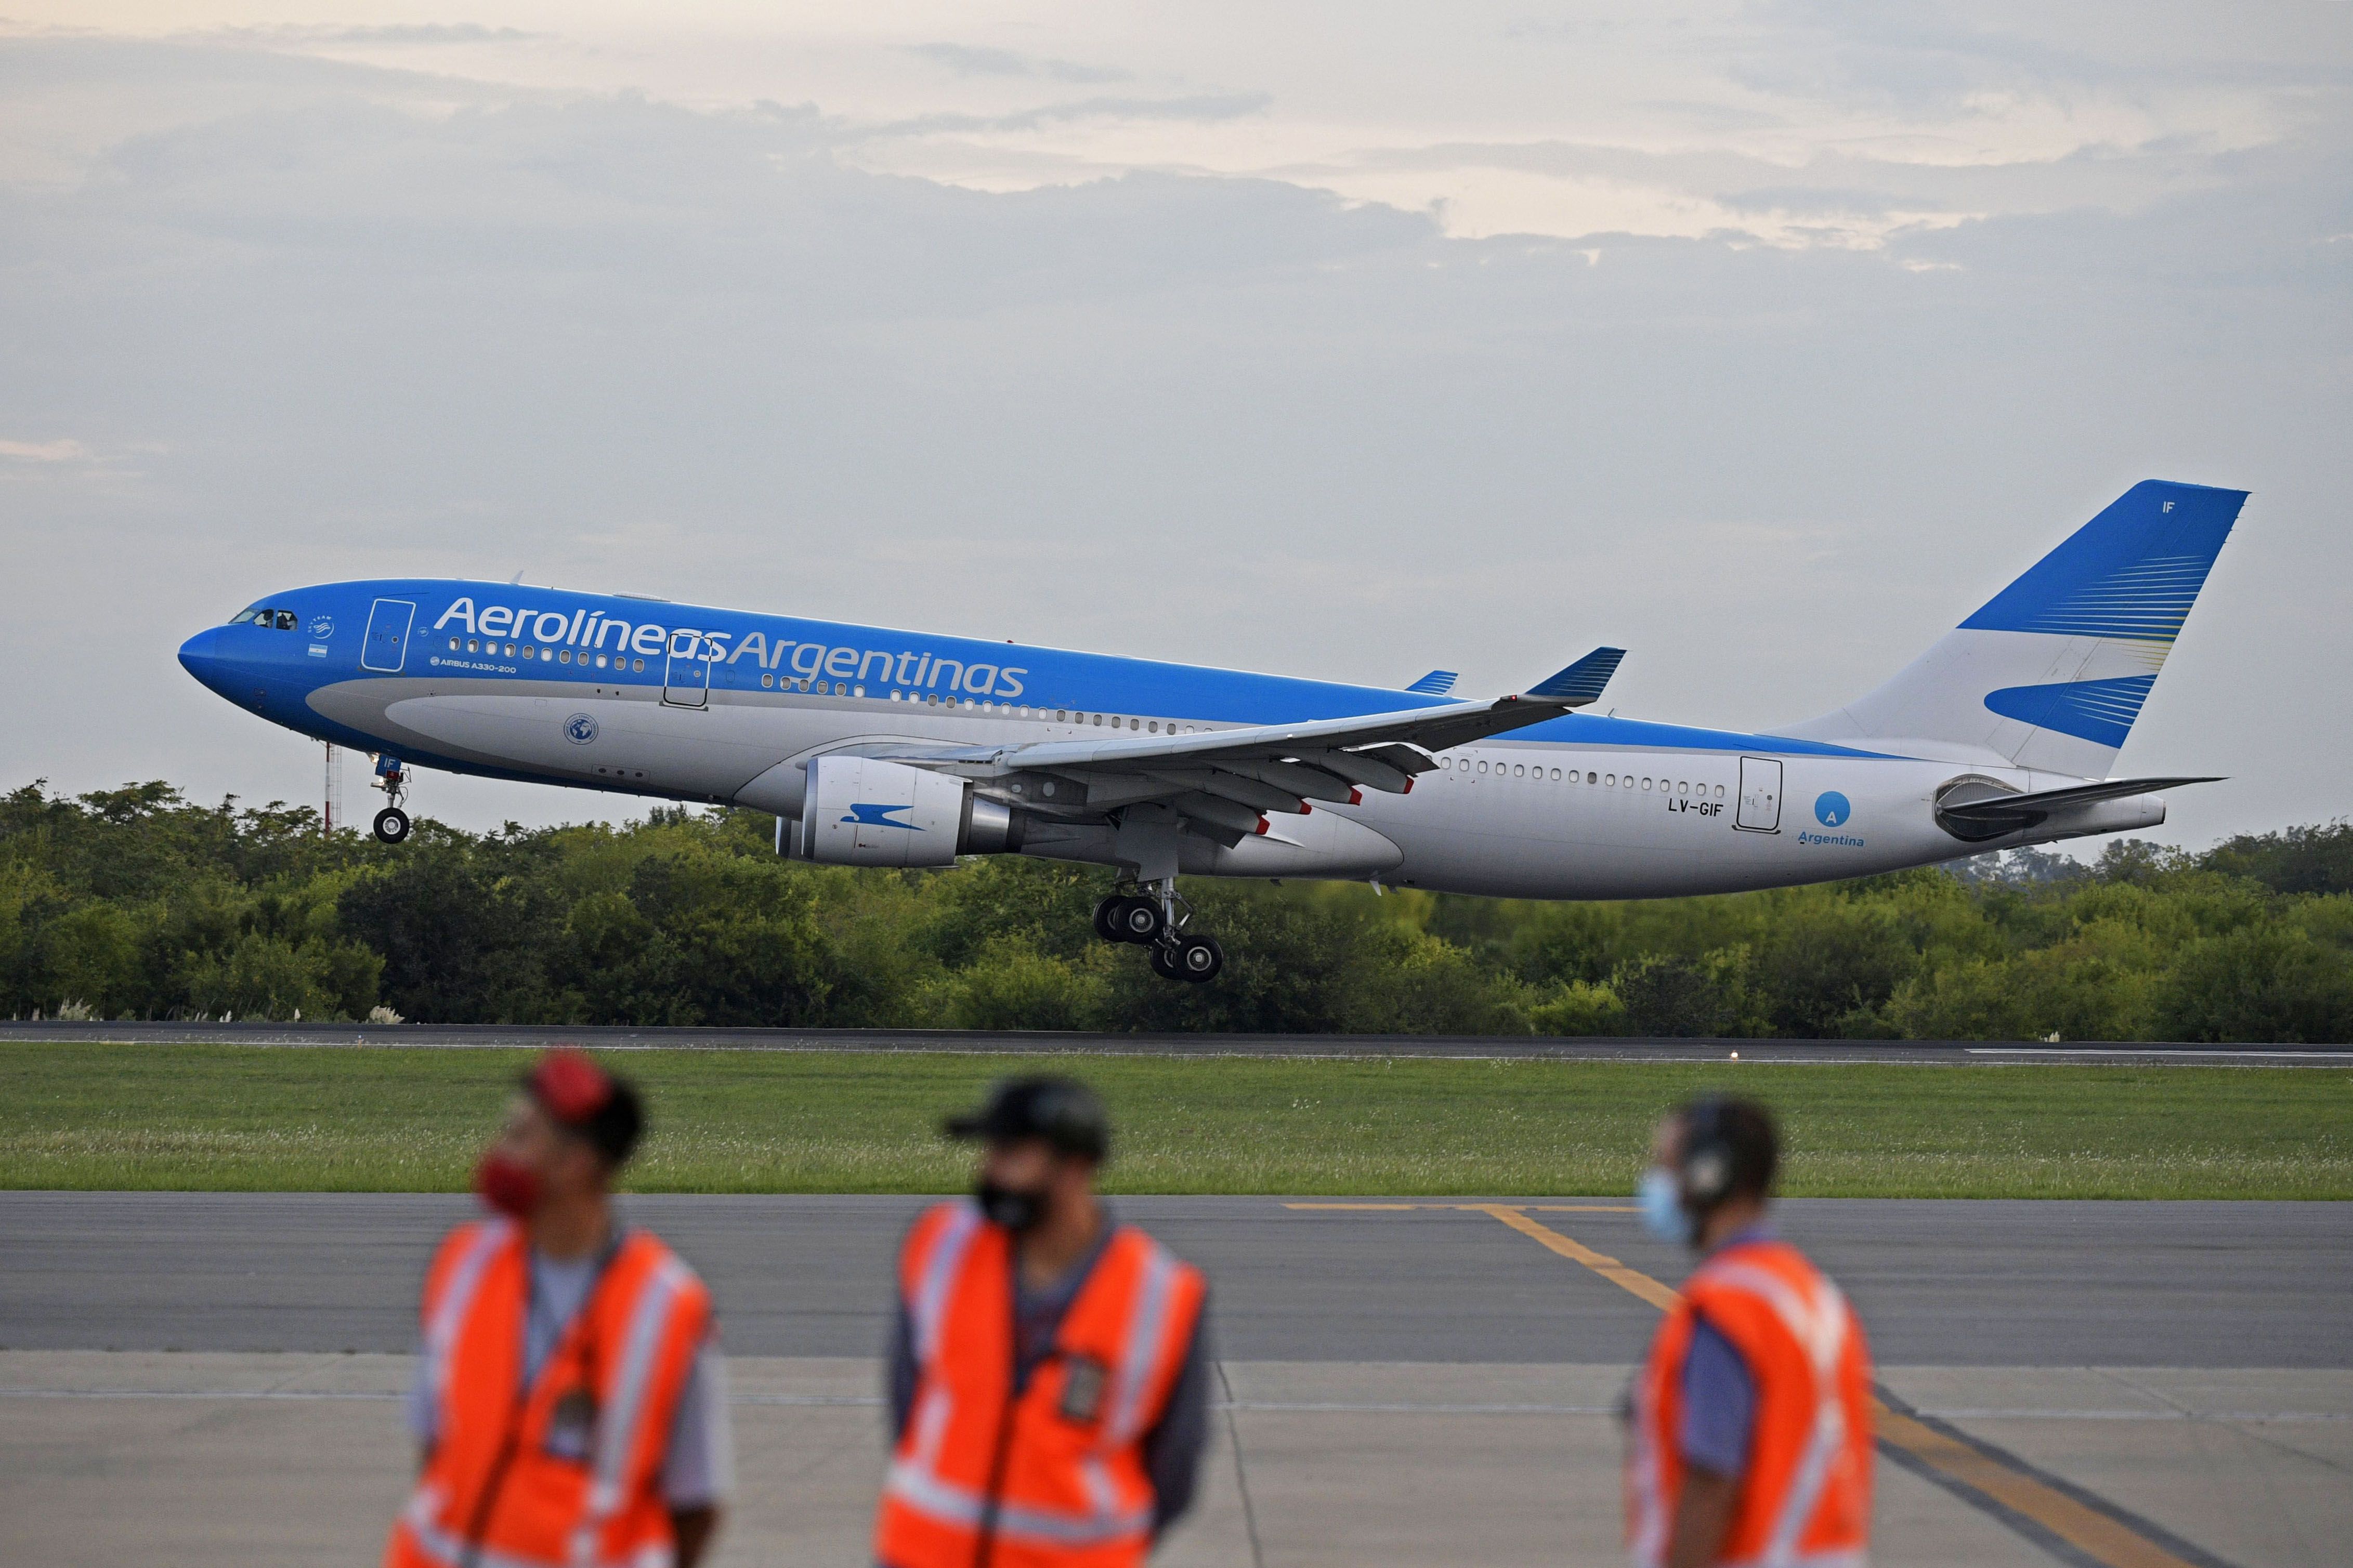 An Aerolineas Argentinas airplane carrying a container with Sputnik V vaccine doses against COVID-19, lands at the Ezeiza International Airport in Buenos Aires